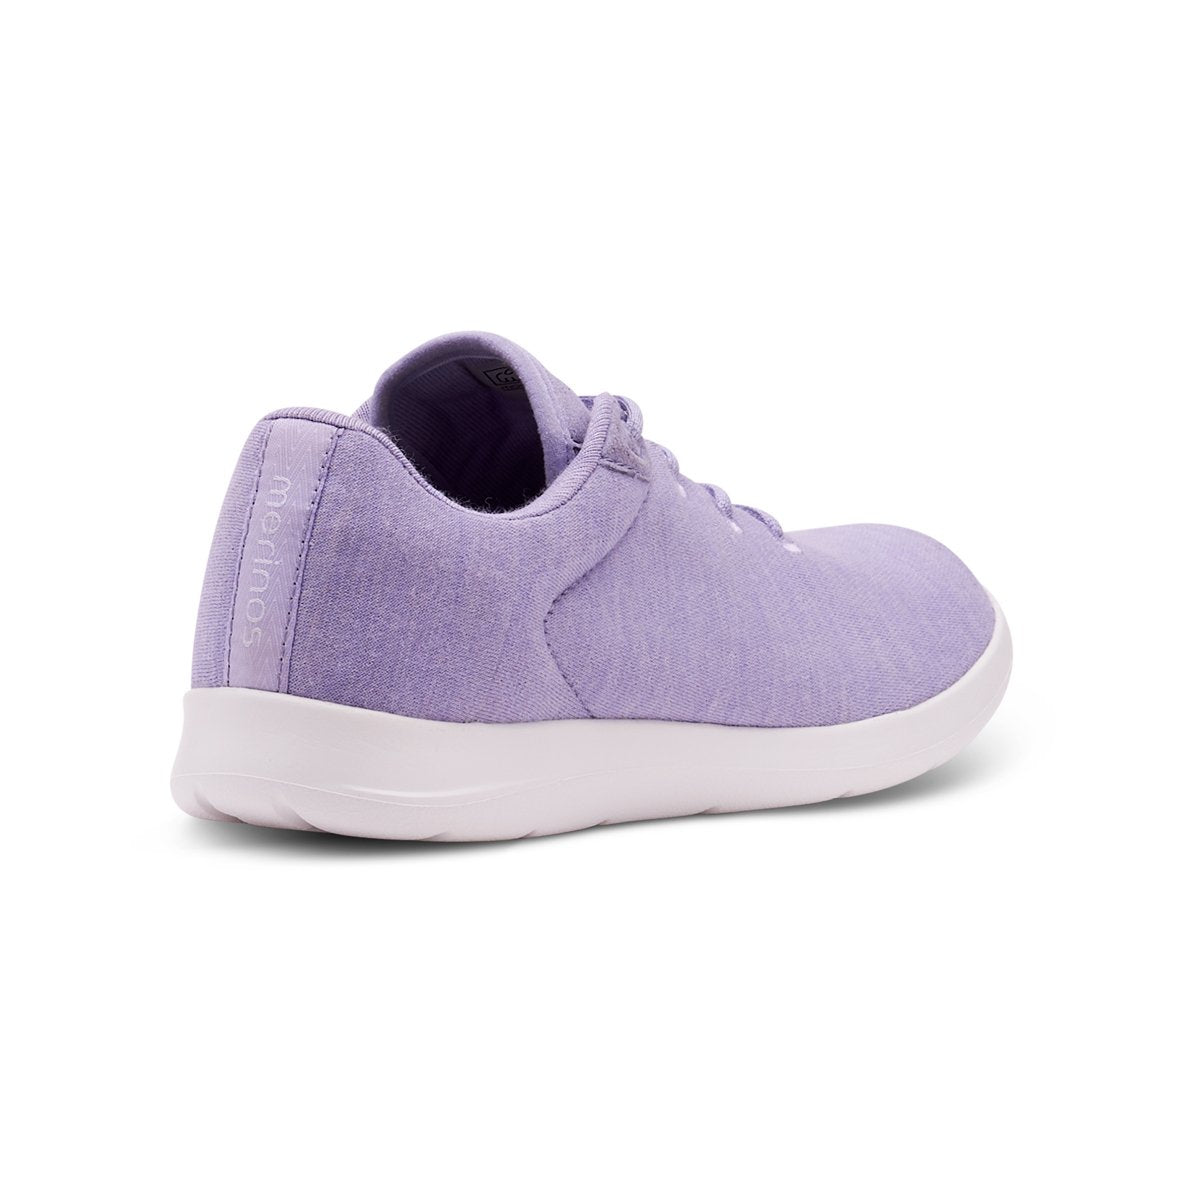 Women's Lace-Ups Lavender - Special Offer